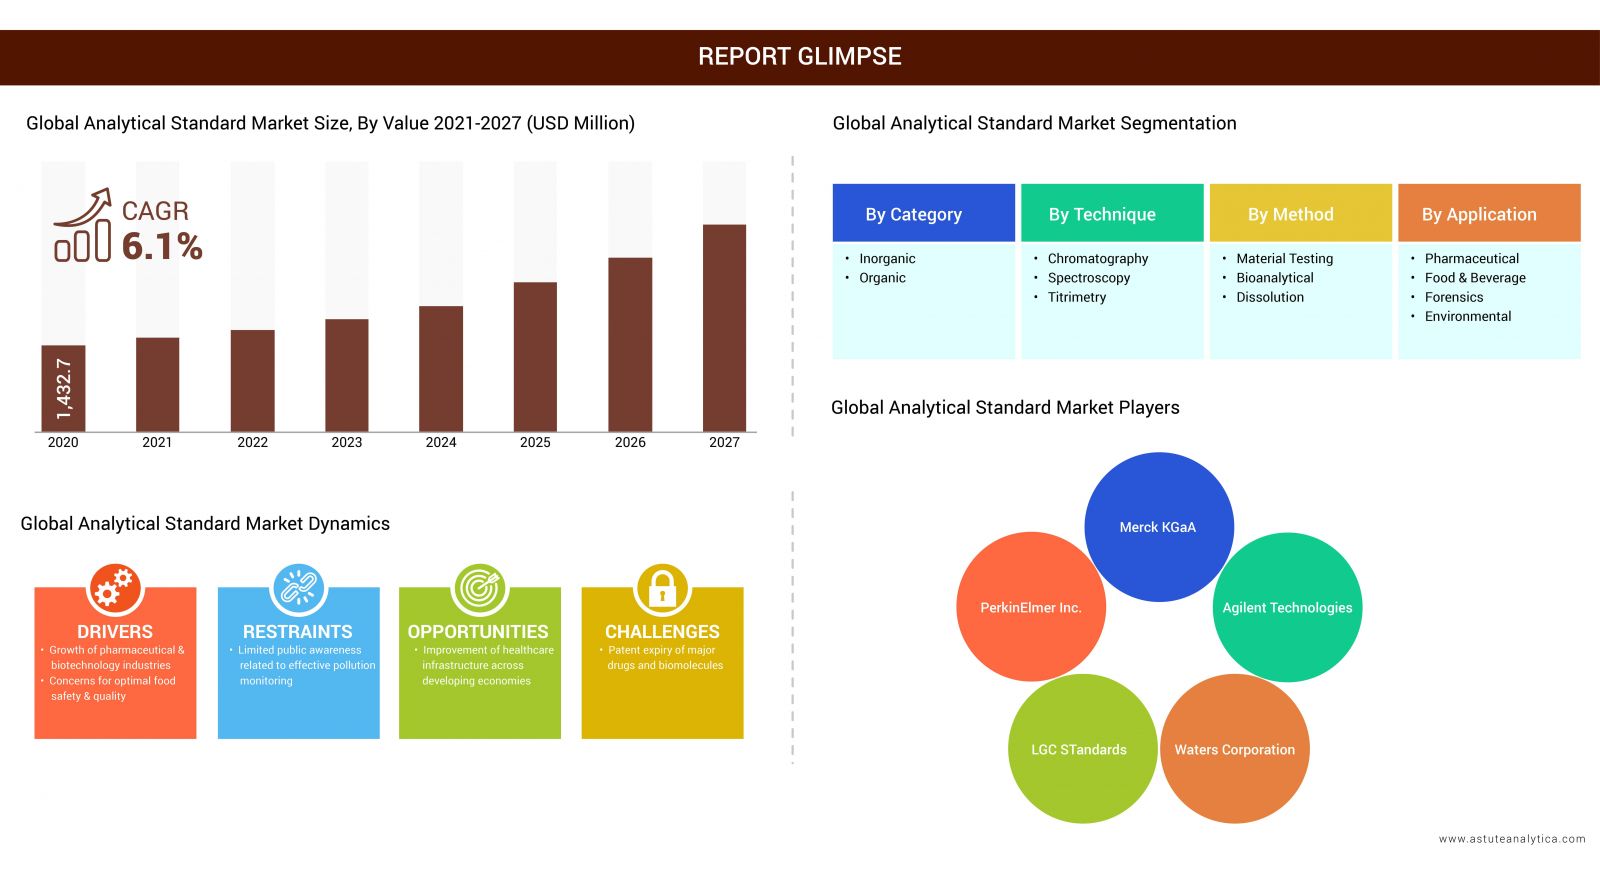 Analytical Standards Market Report Glimpse